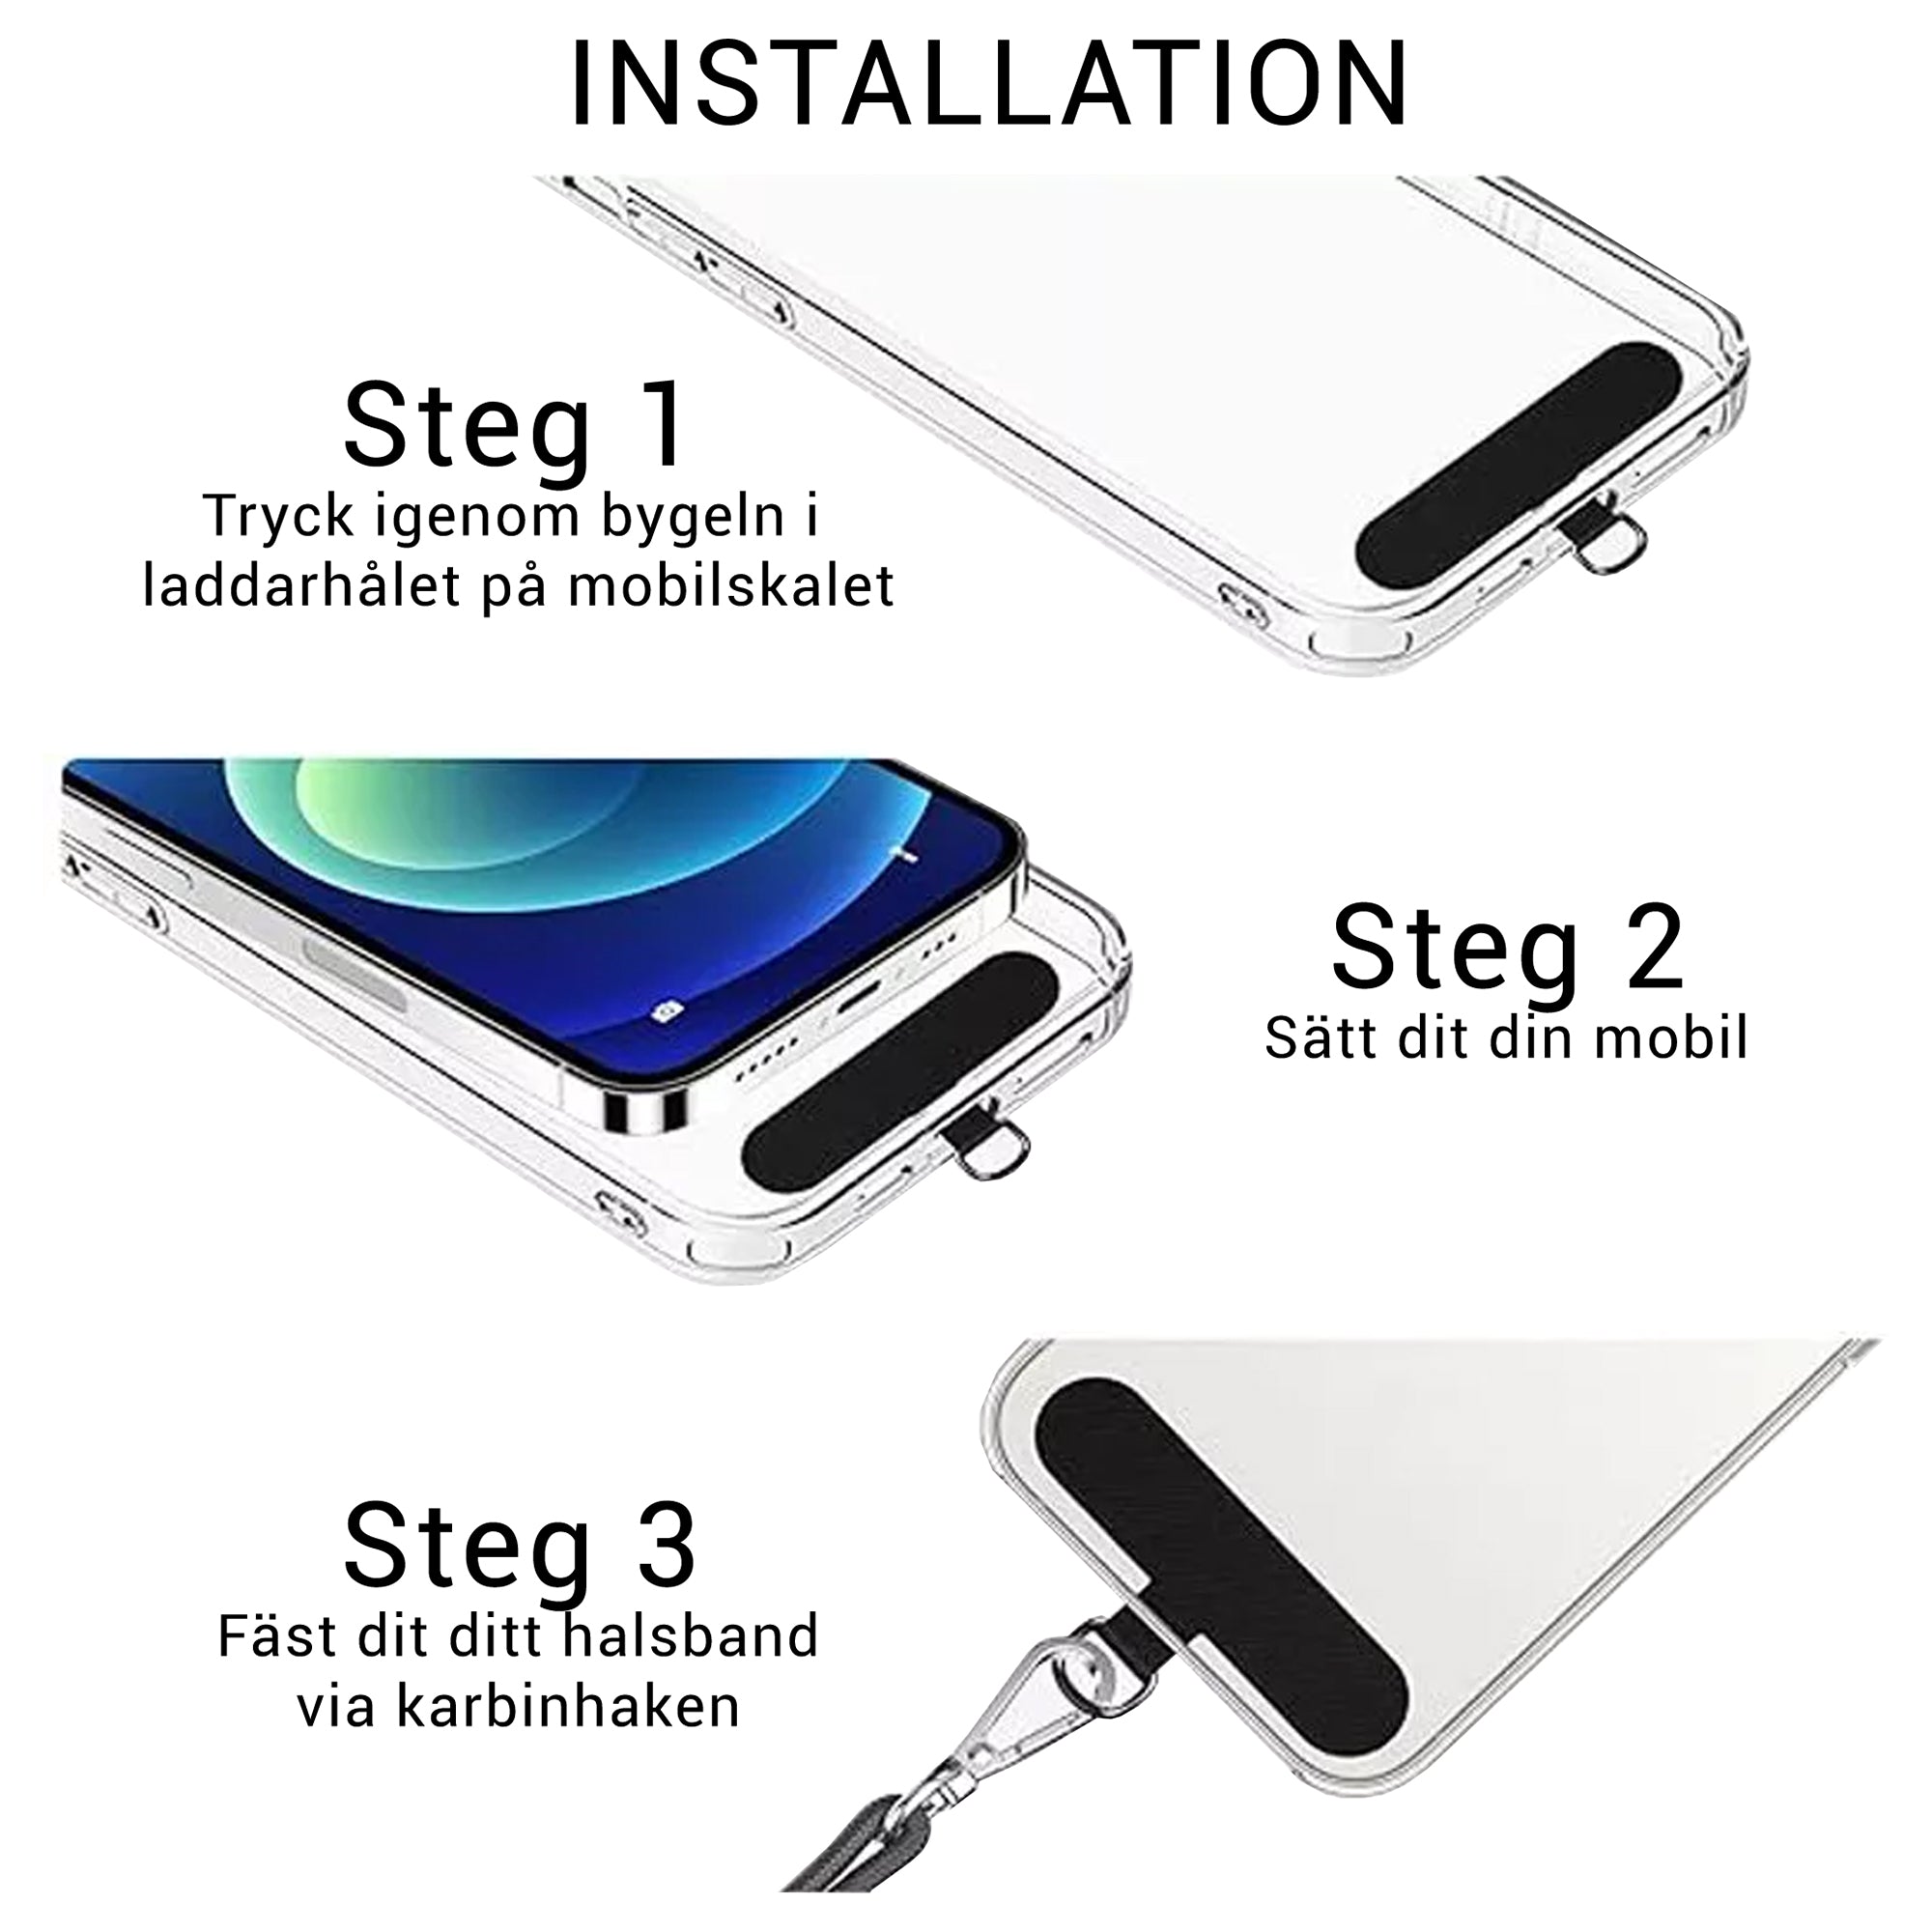 Steps to install a Bärrem för mobilskal: 1. Insert the hook through the charging hole in the mobilskal kompatibel. 2. Place your phone into the case. 3. Attach the justerbar rem to the hook using the clasp. Instructions in Swedish.